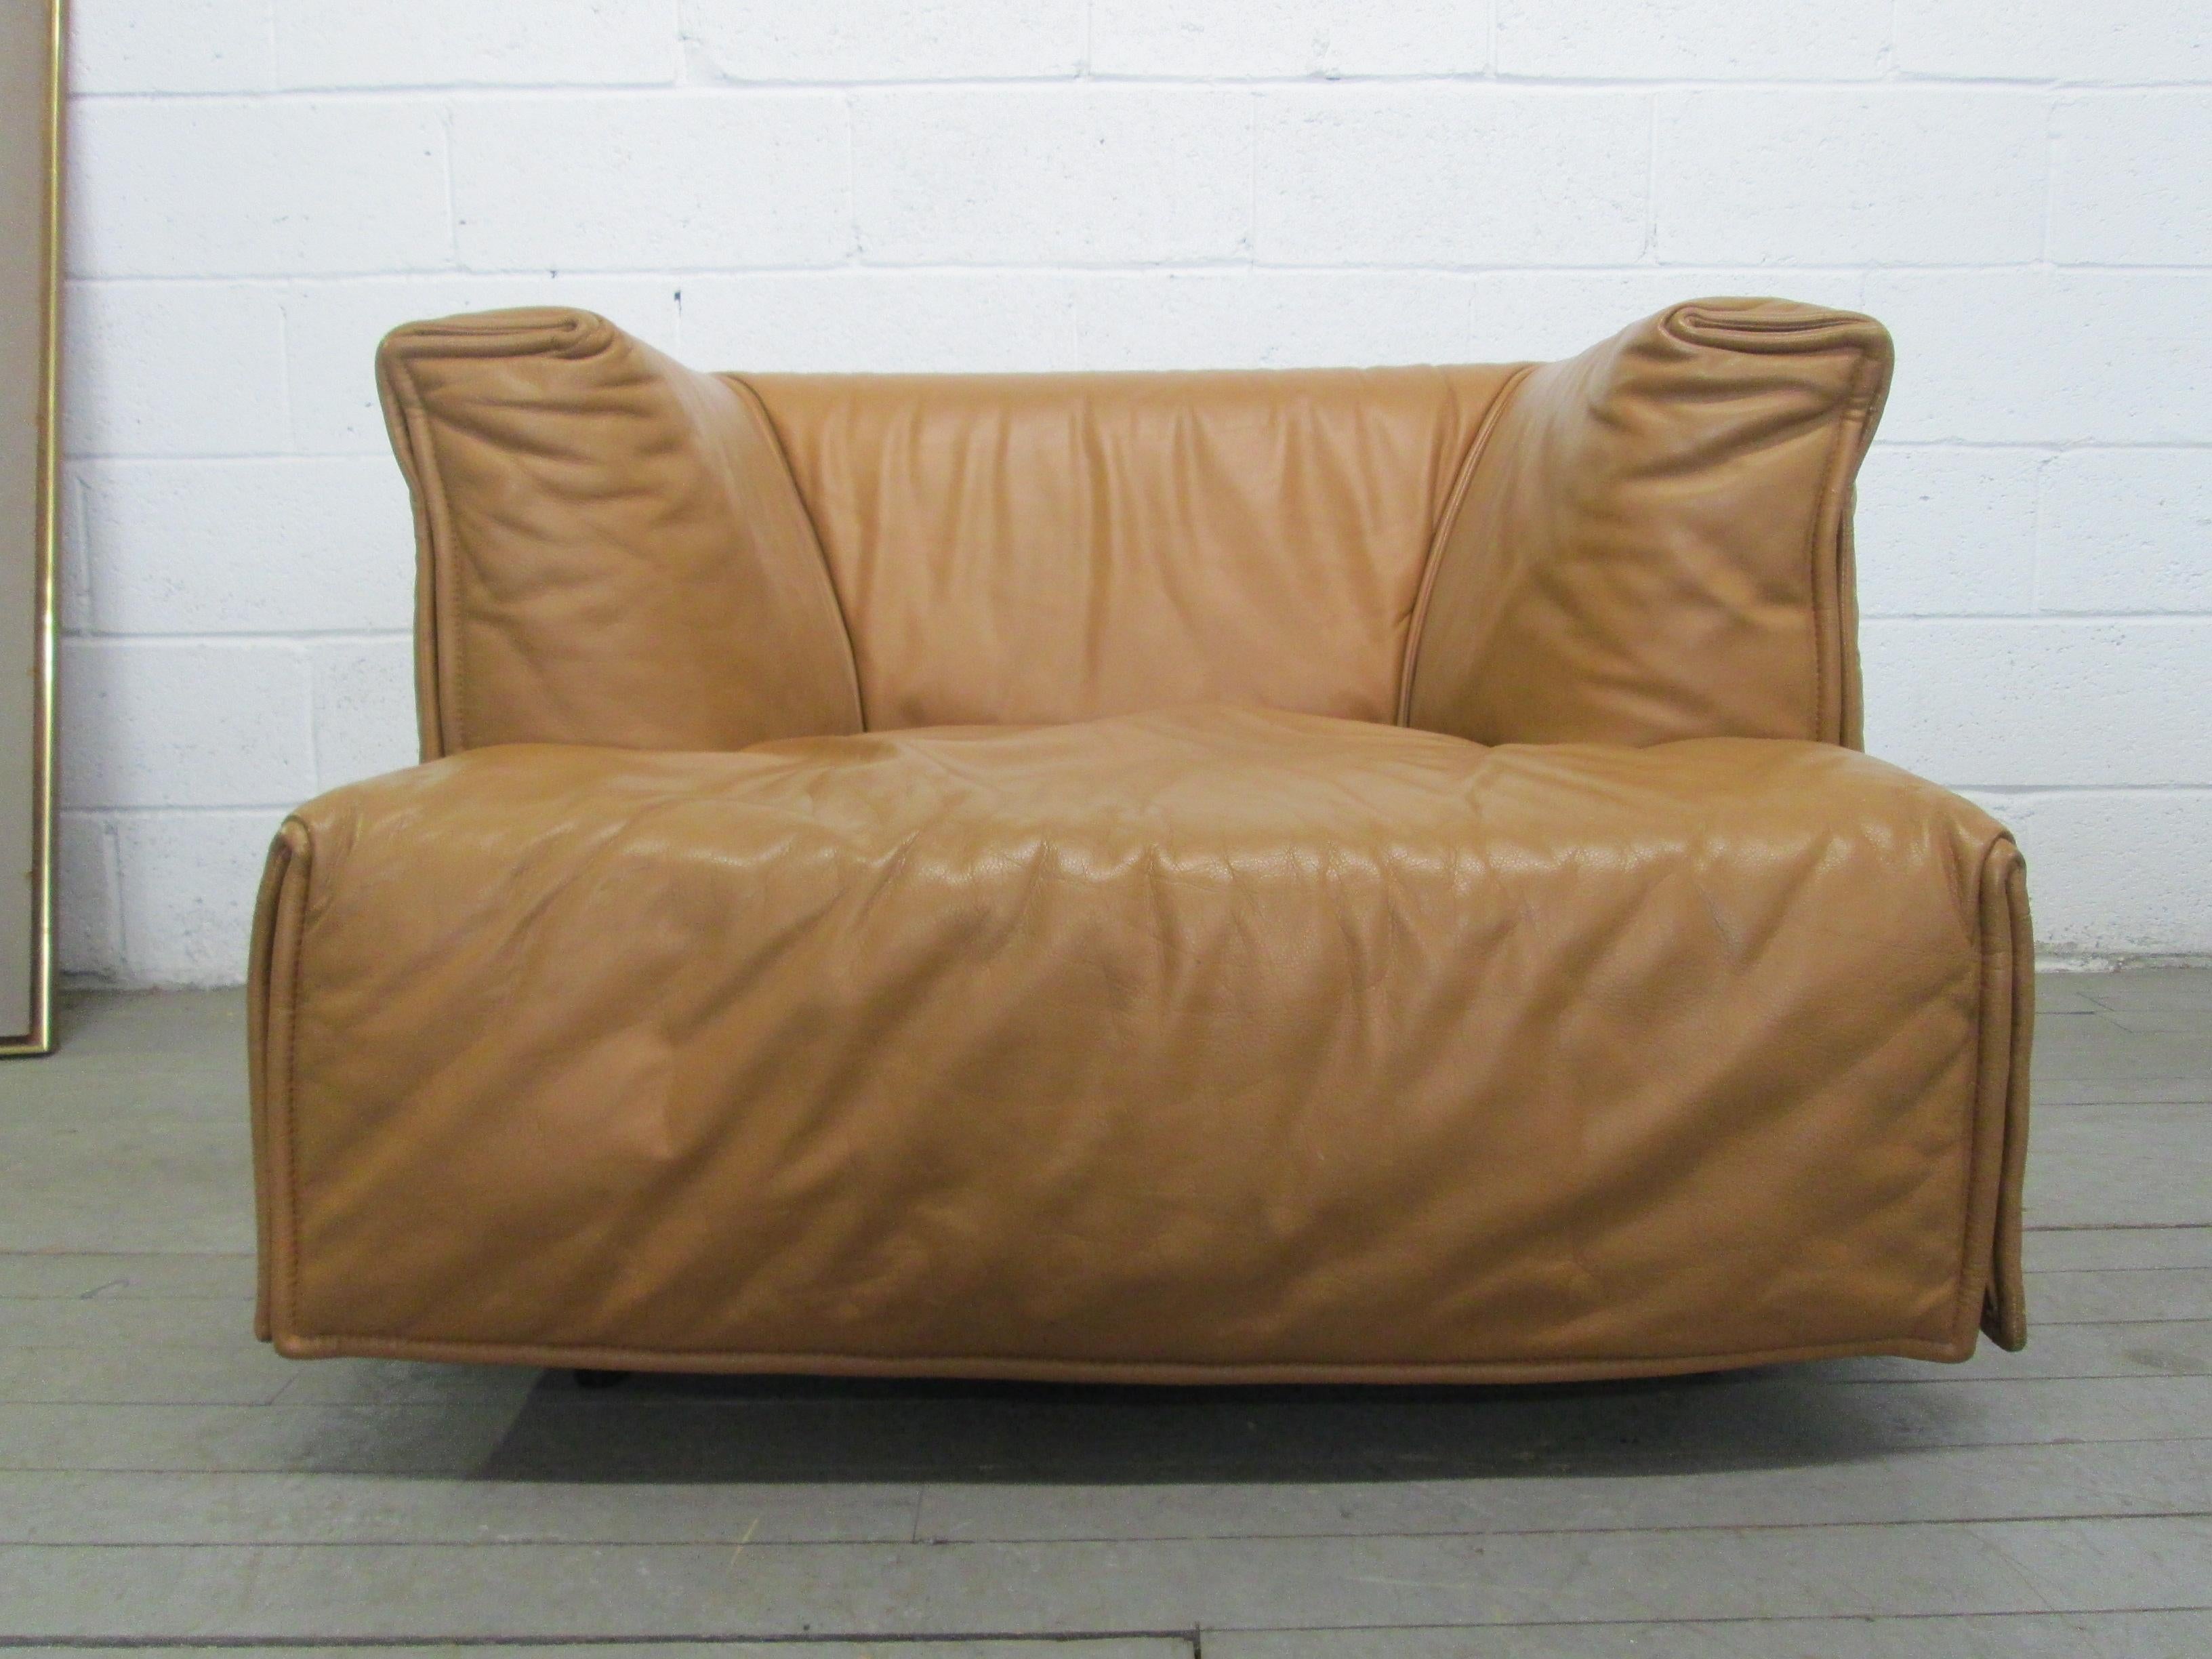 Wonderful, soft and comfortable leather Italian lounge chair. Well designed.  DeSede Style.